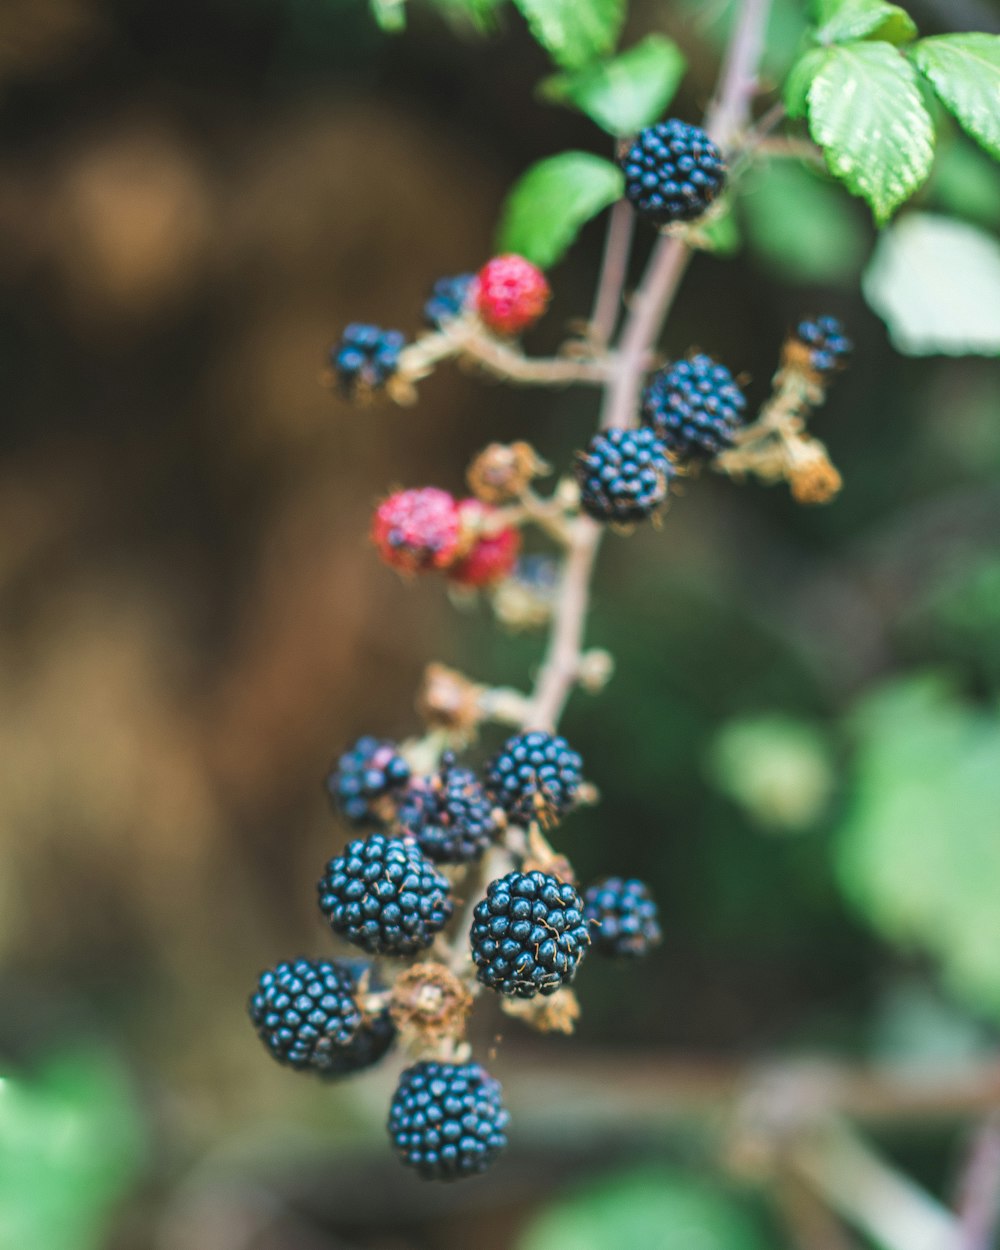 blue and red round fruits